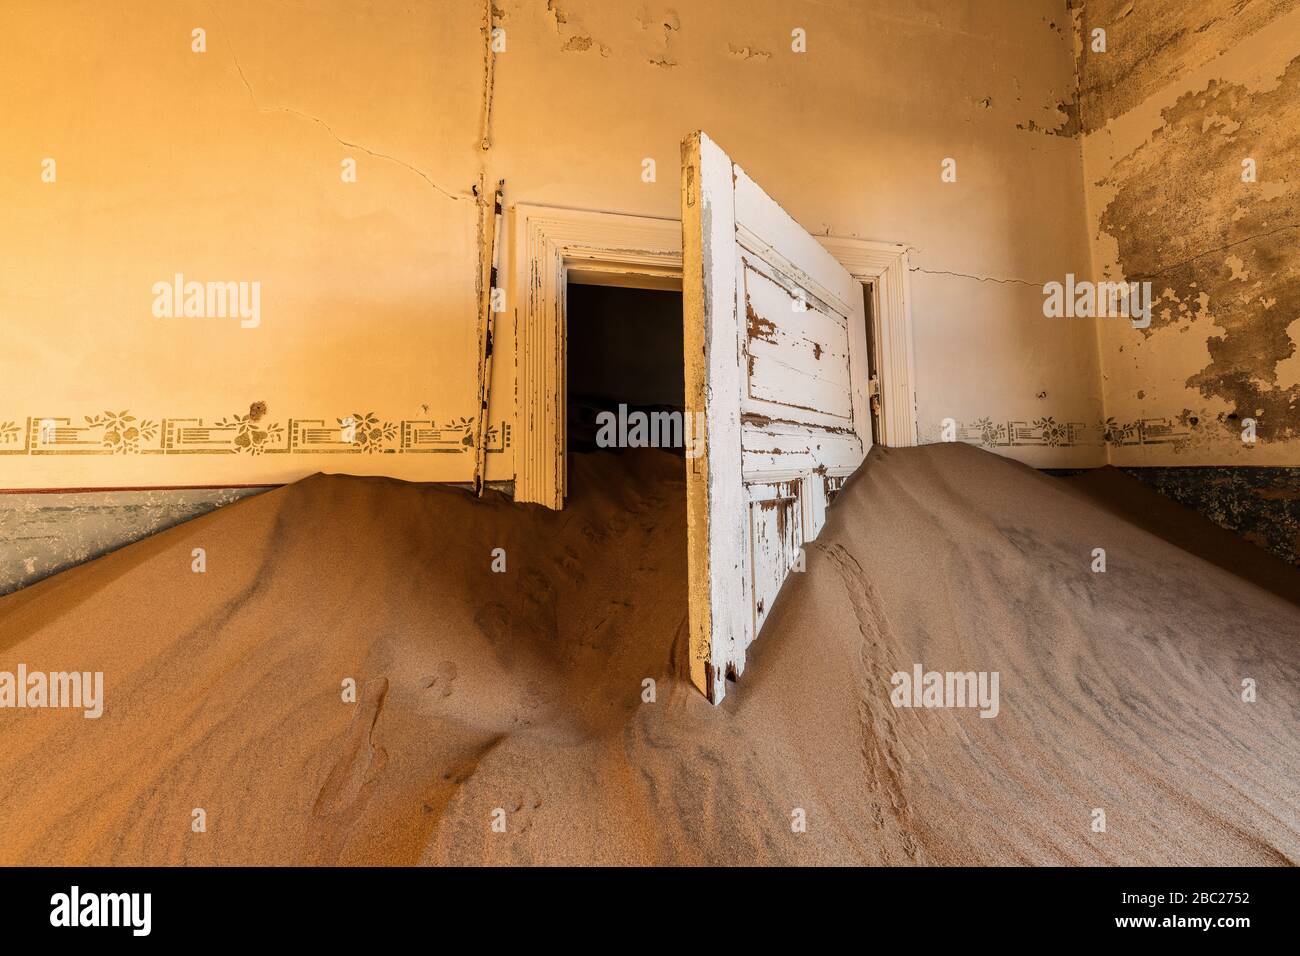 A photograph inside an abandoned house with an open white door submerged in the rippled desert sand, taken in the ghost town of Kolmanskop, Namibia. Stock Photo